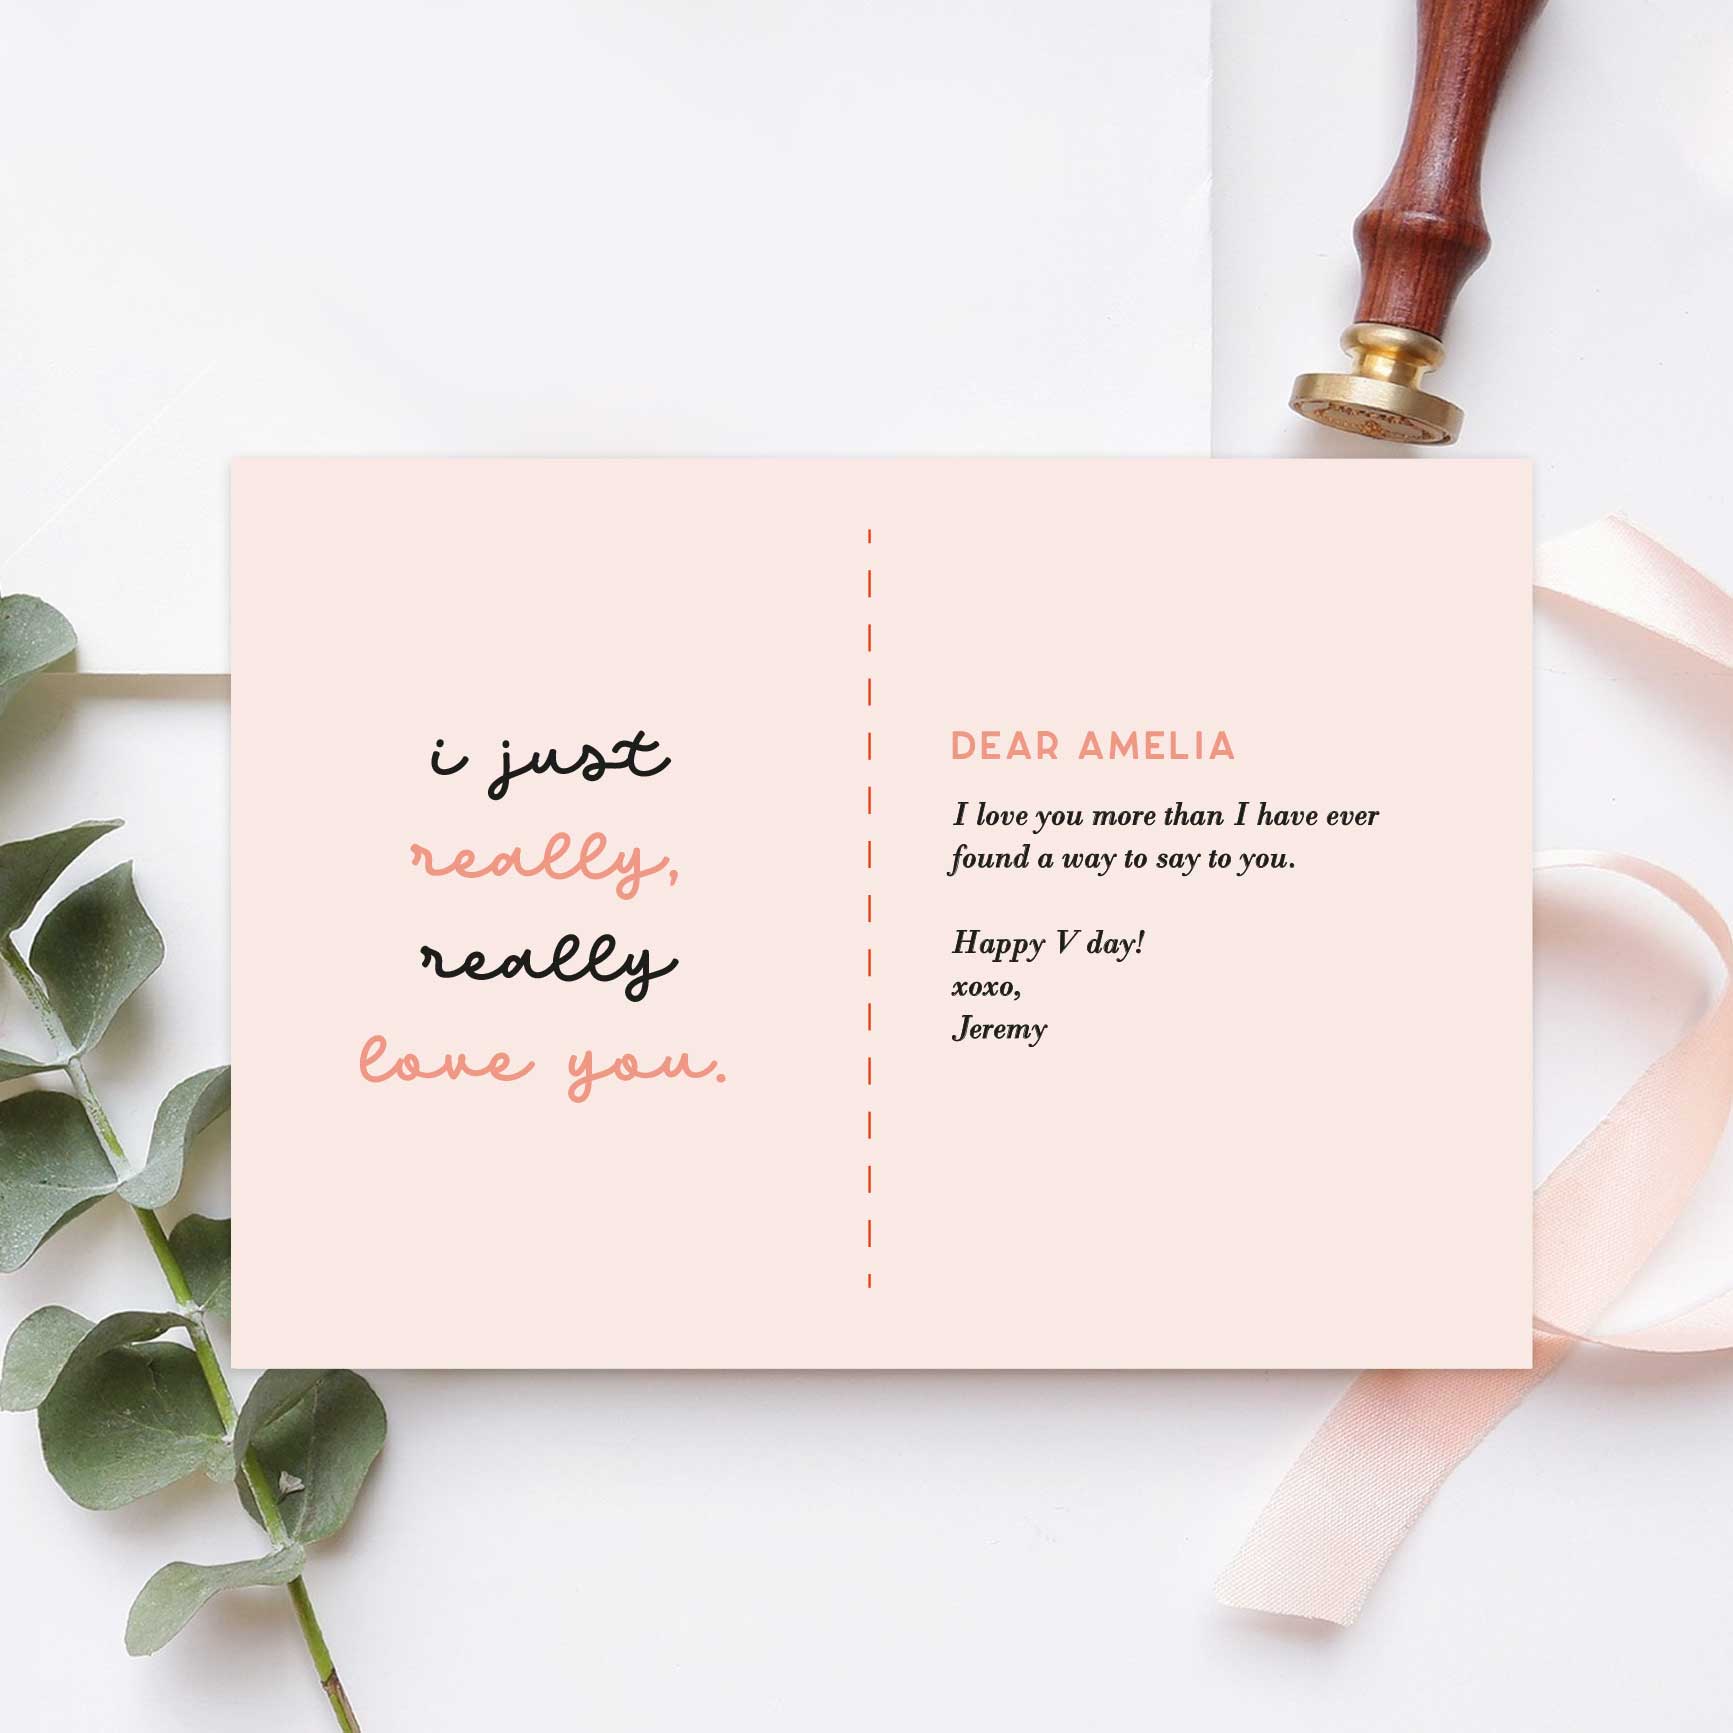 Valentines Collection One-sided Gift card - I Just Really, Really Love You. Typography Design